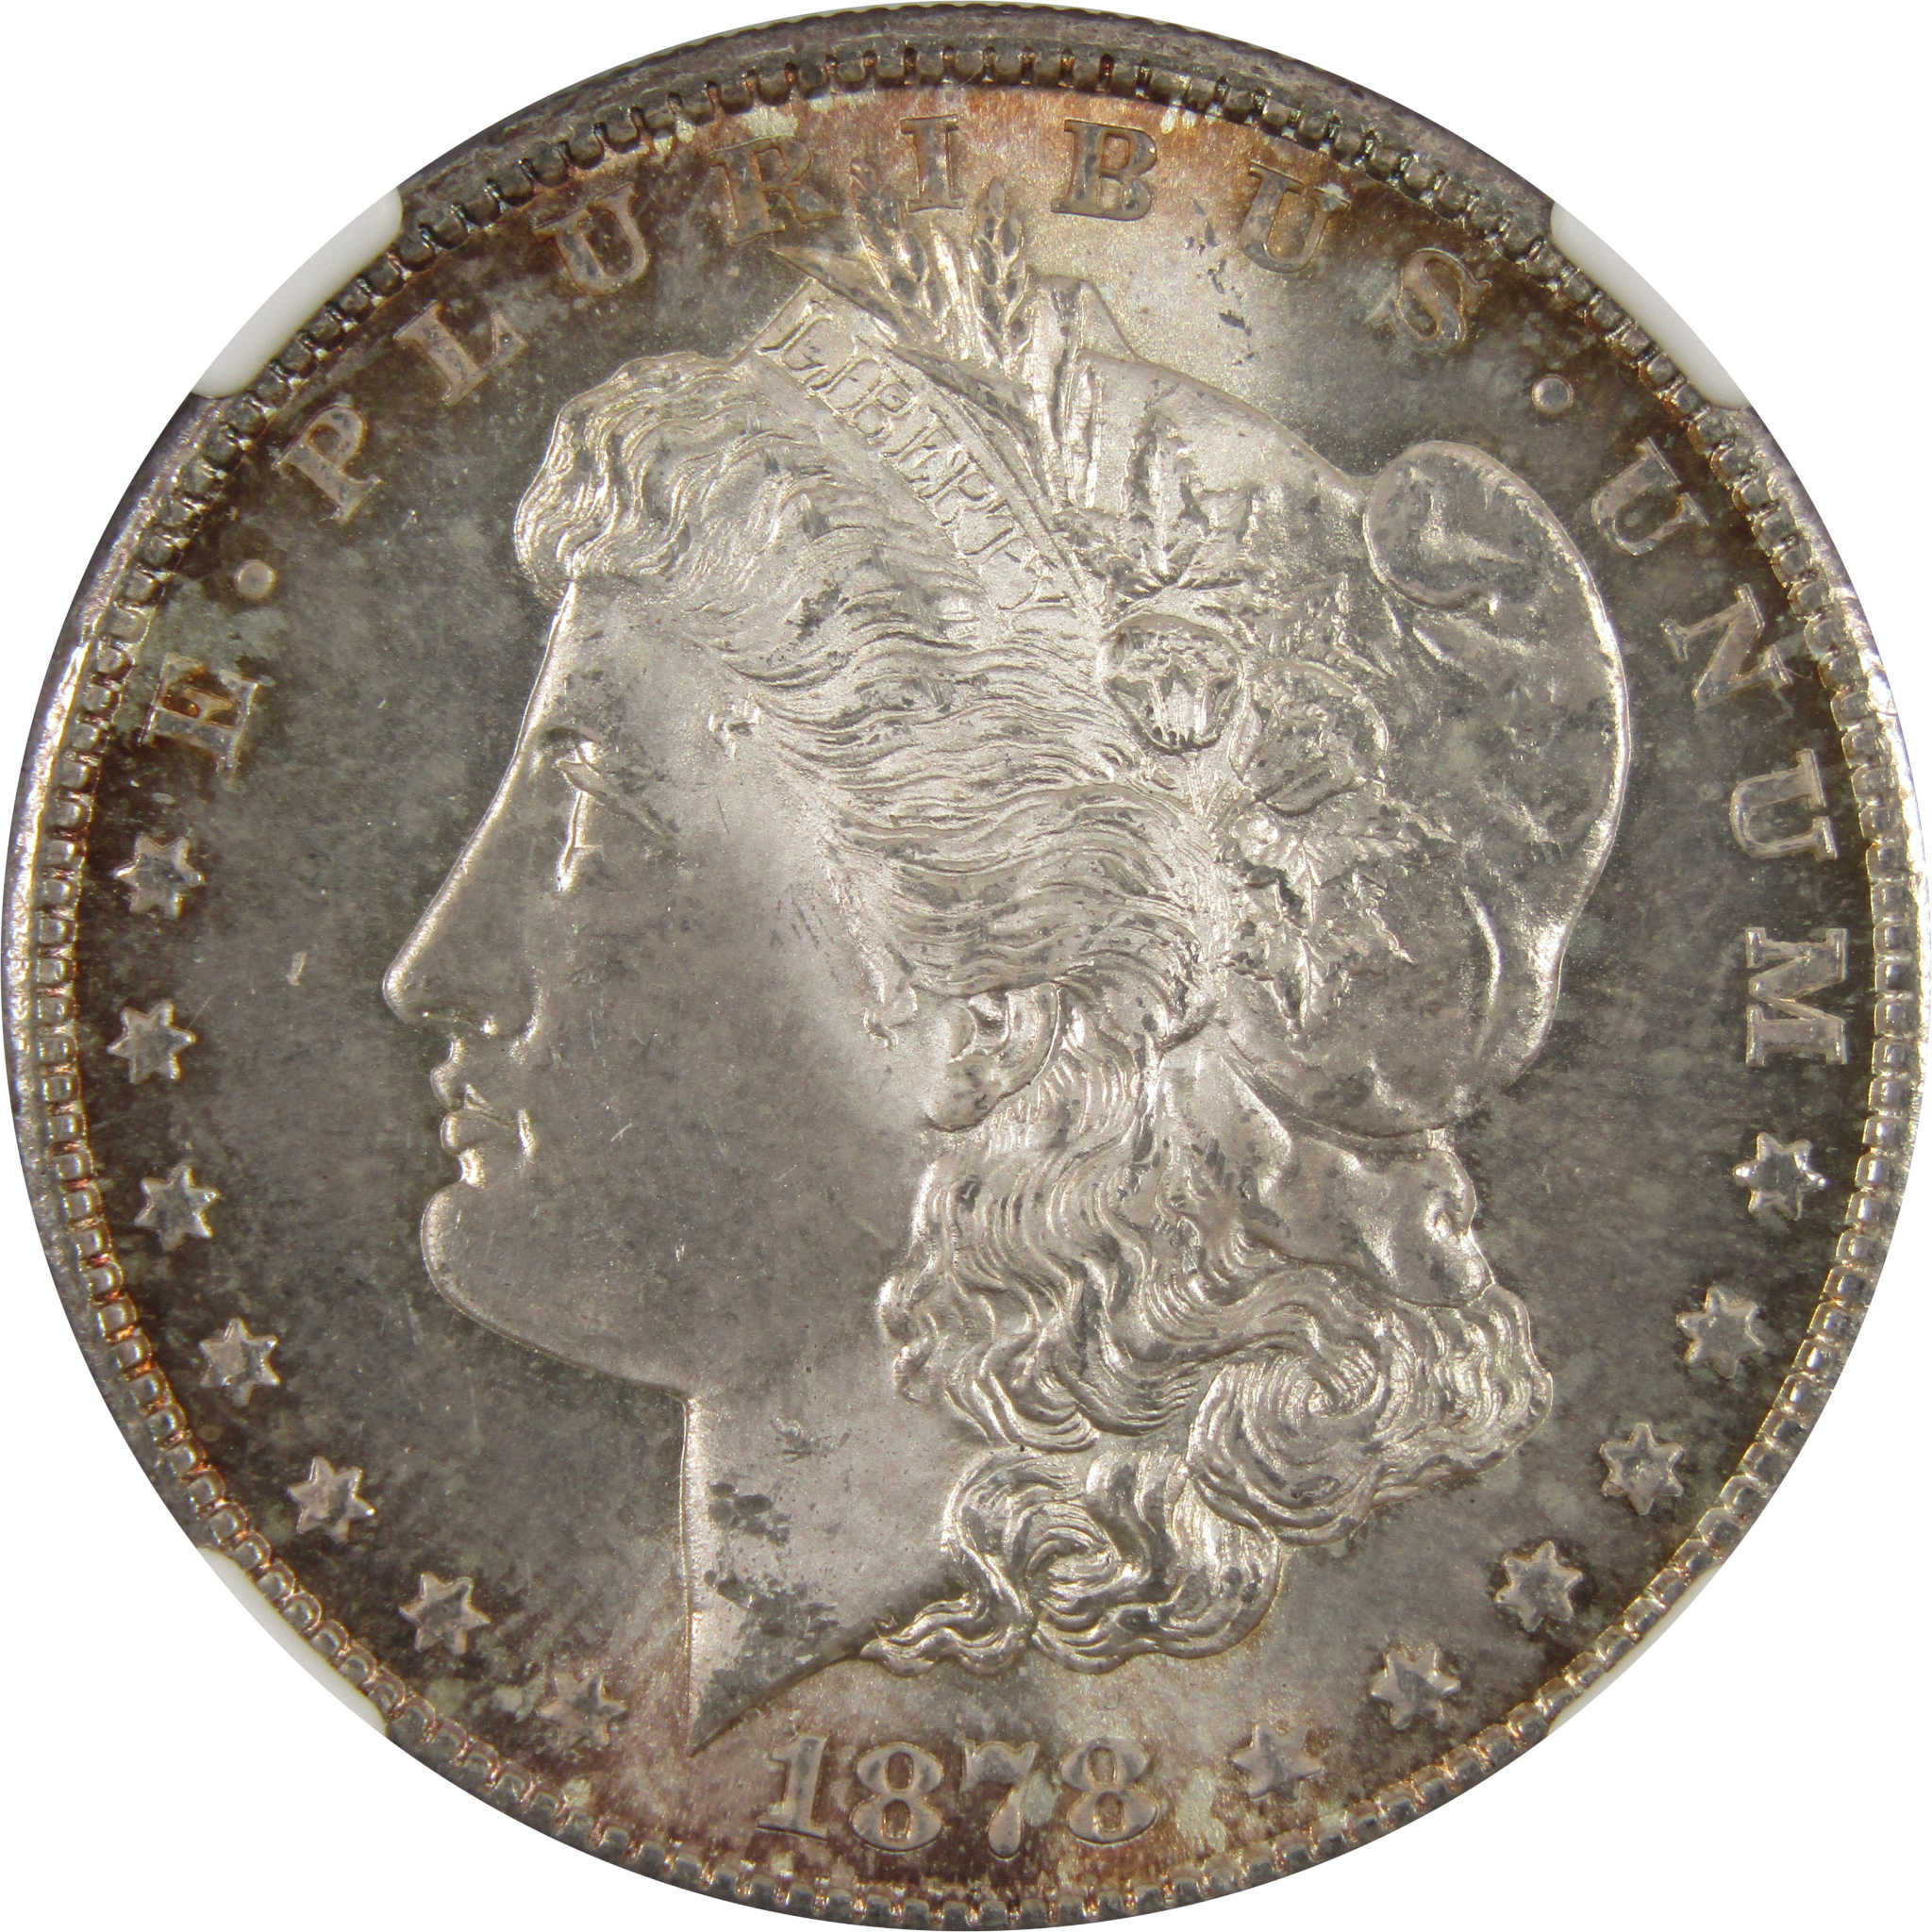 1878 S Morgan Dollar MS 64 NGC 90% Silver $1 Uncirculated SKU:I7738 - Morgan coin - Morgan silver dollar - Morgan silver dollar for sale - Profile Coins &amp; Collectibles